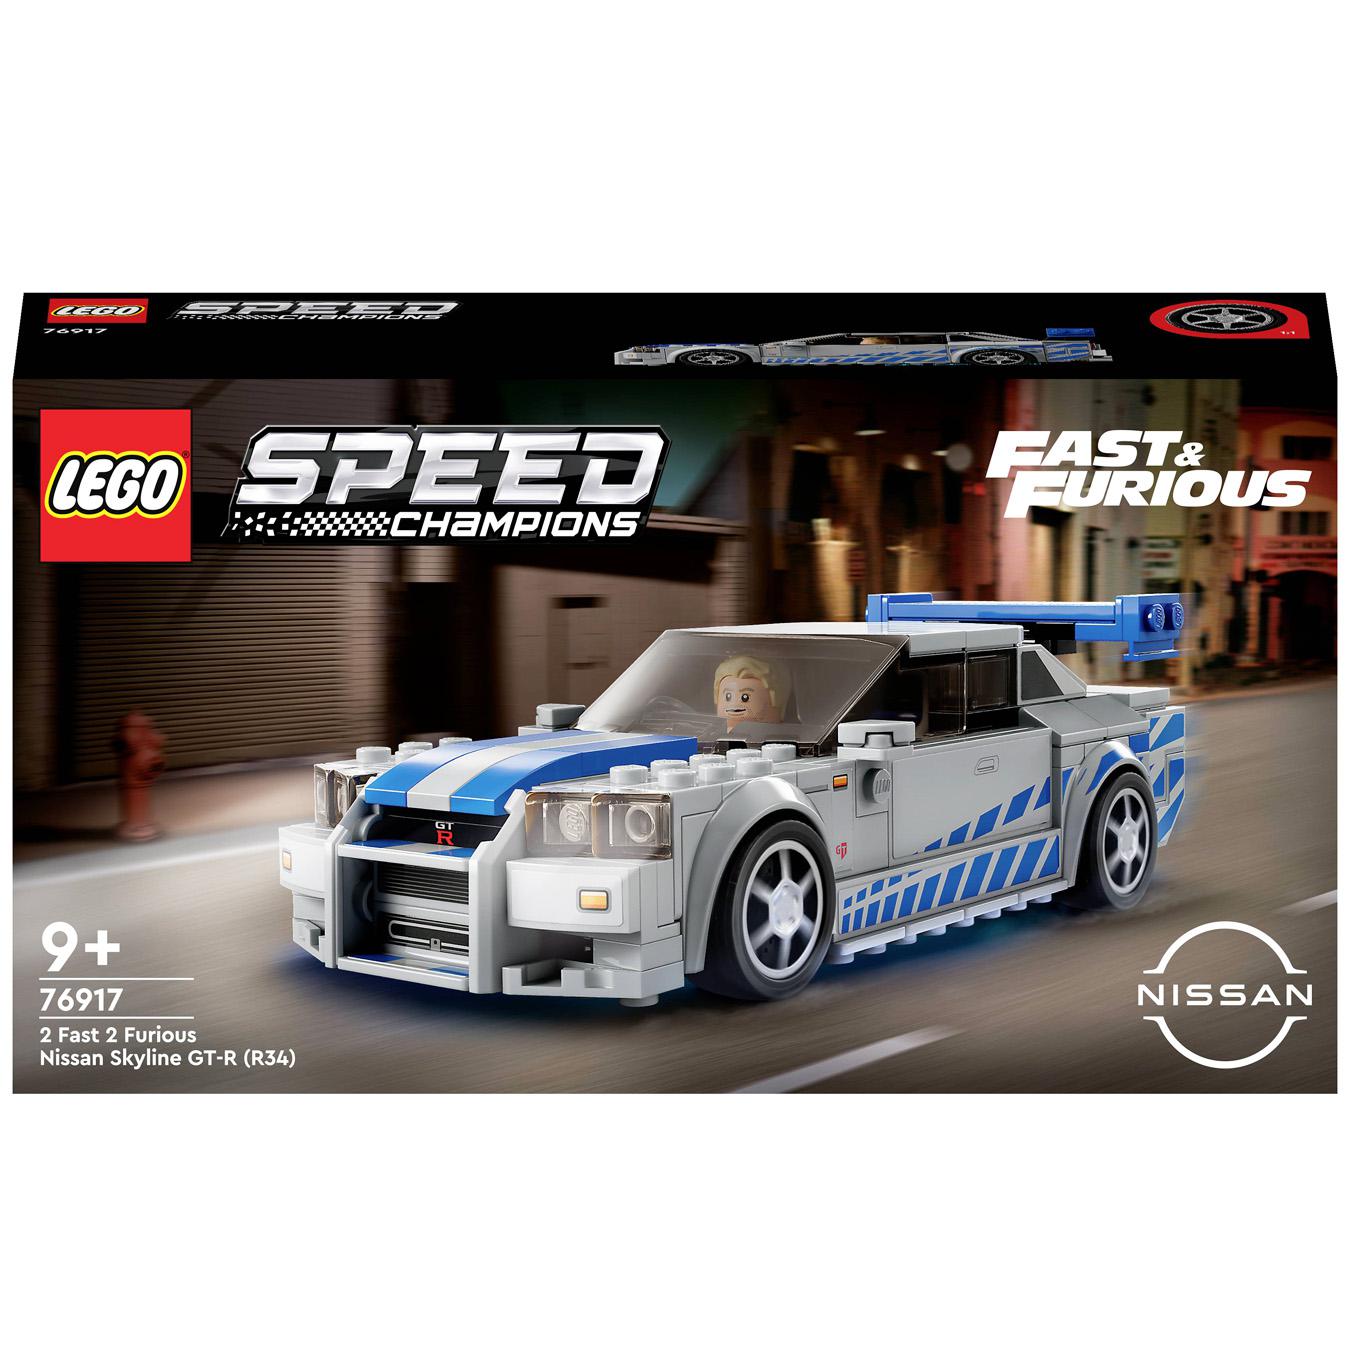 Constructor LEGO Speed Champions 76917 Double Faster» Nissan Skylve GT-R (R34)